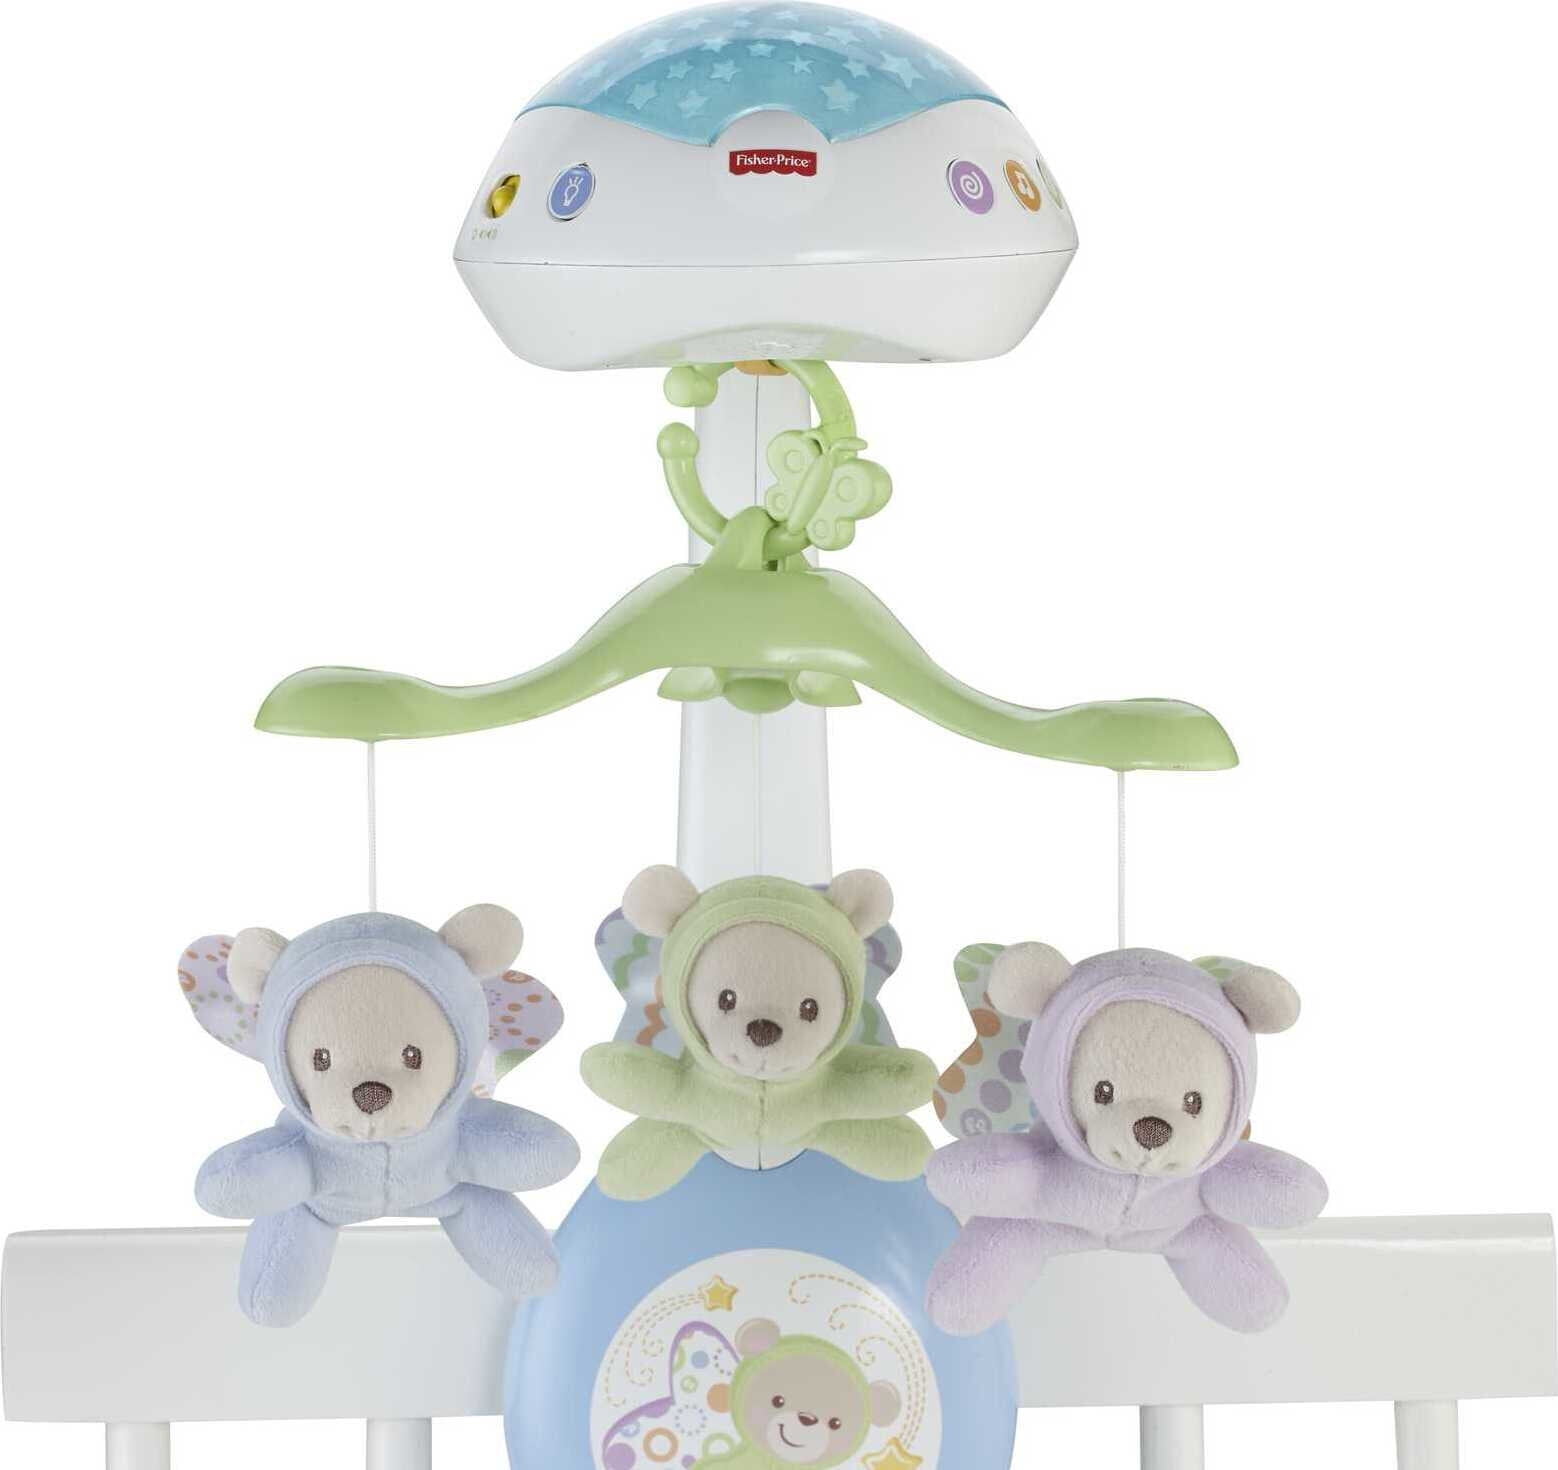 Stationair Vanaf daar wees onder de indruk Fisher-Price 3-in-1 Projection Mobile, Butterfly Dreams, Baby Crib Toy with  Light Projection - Walmart.com